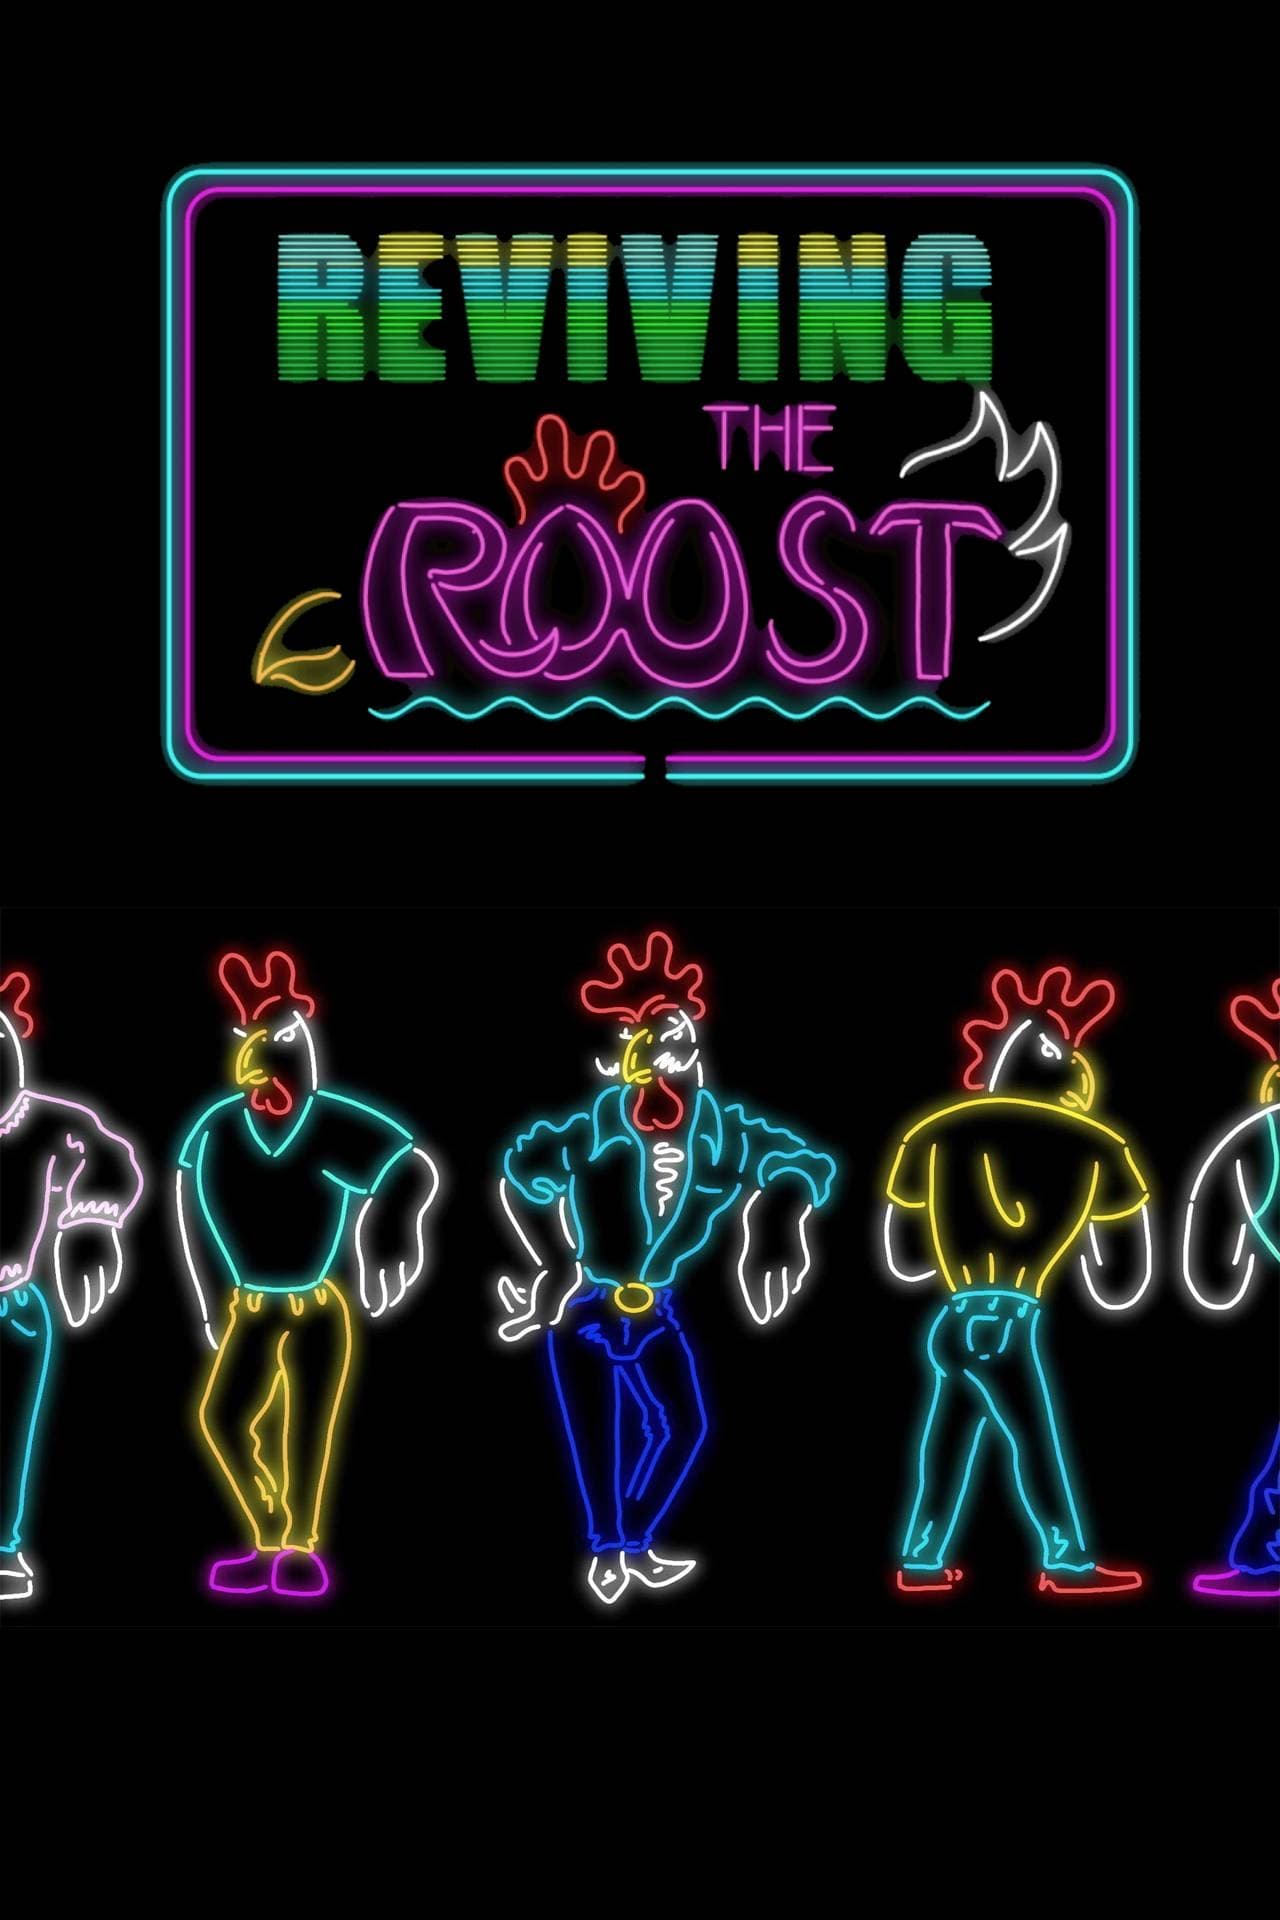 Reviving The Roost